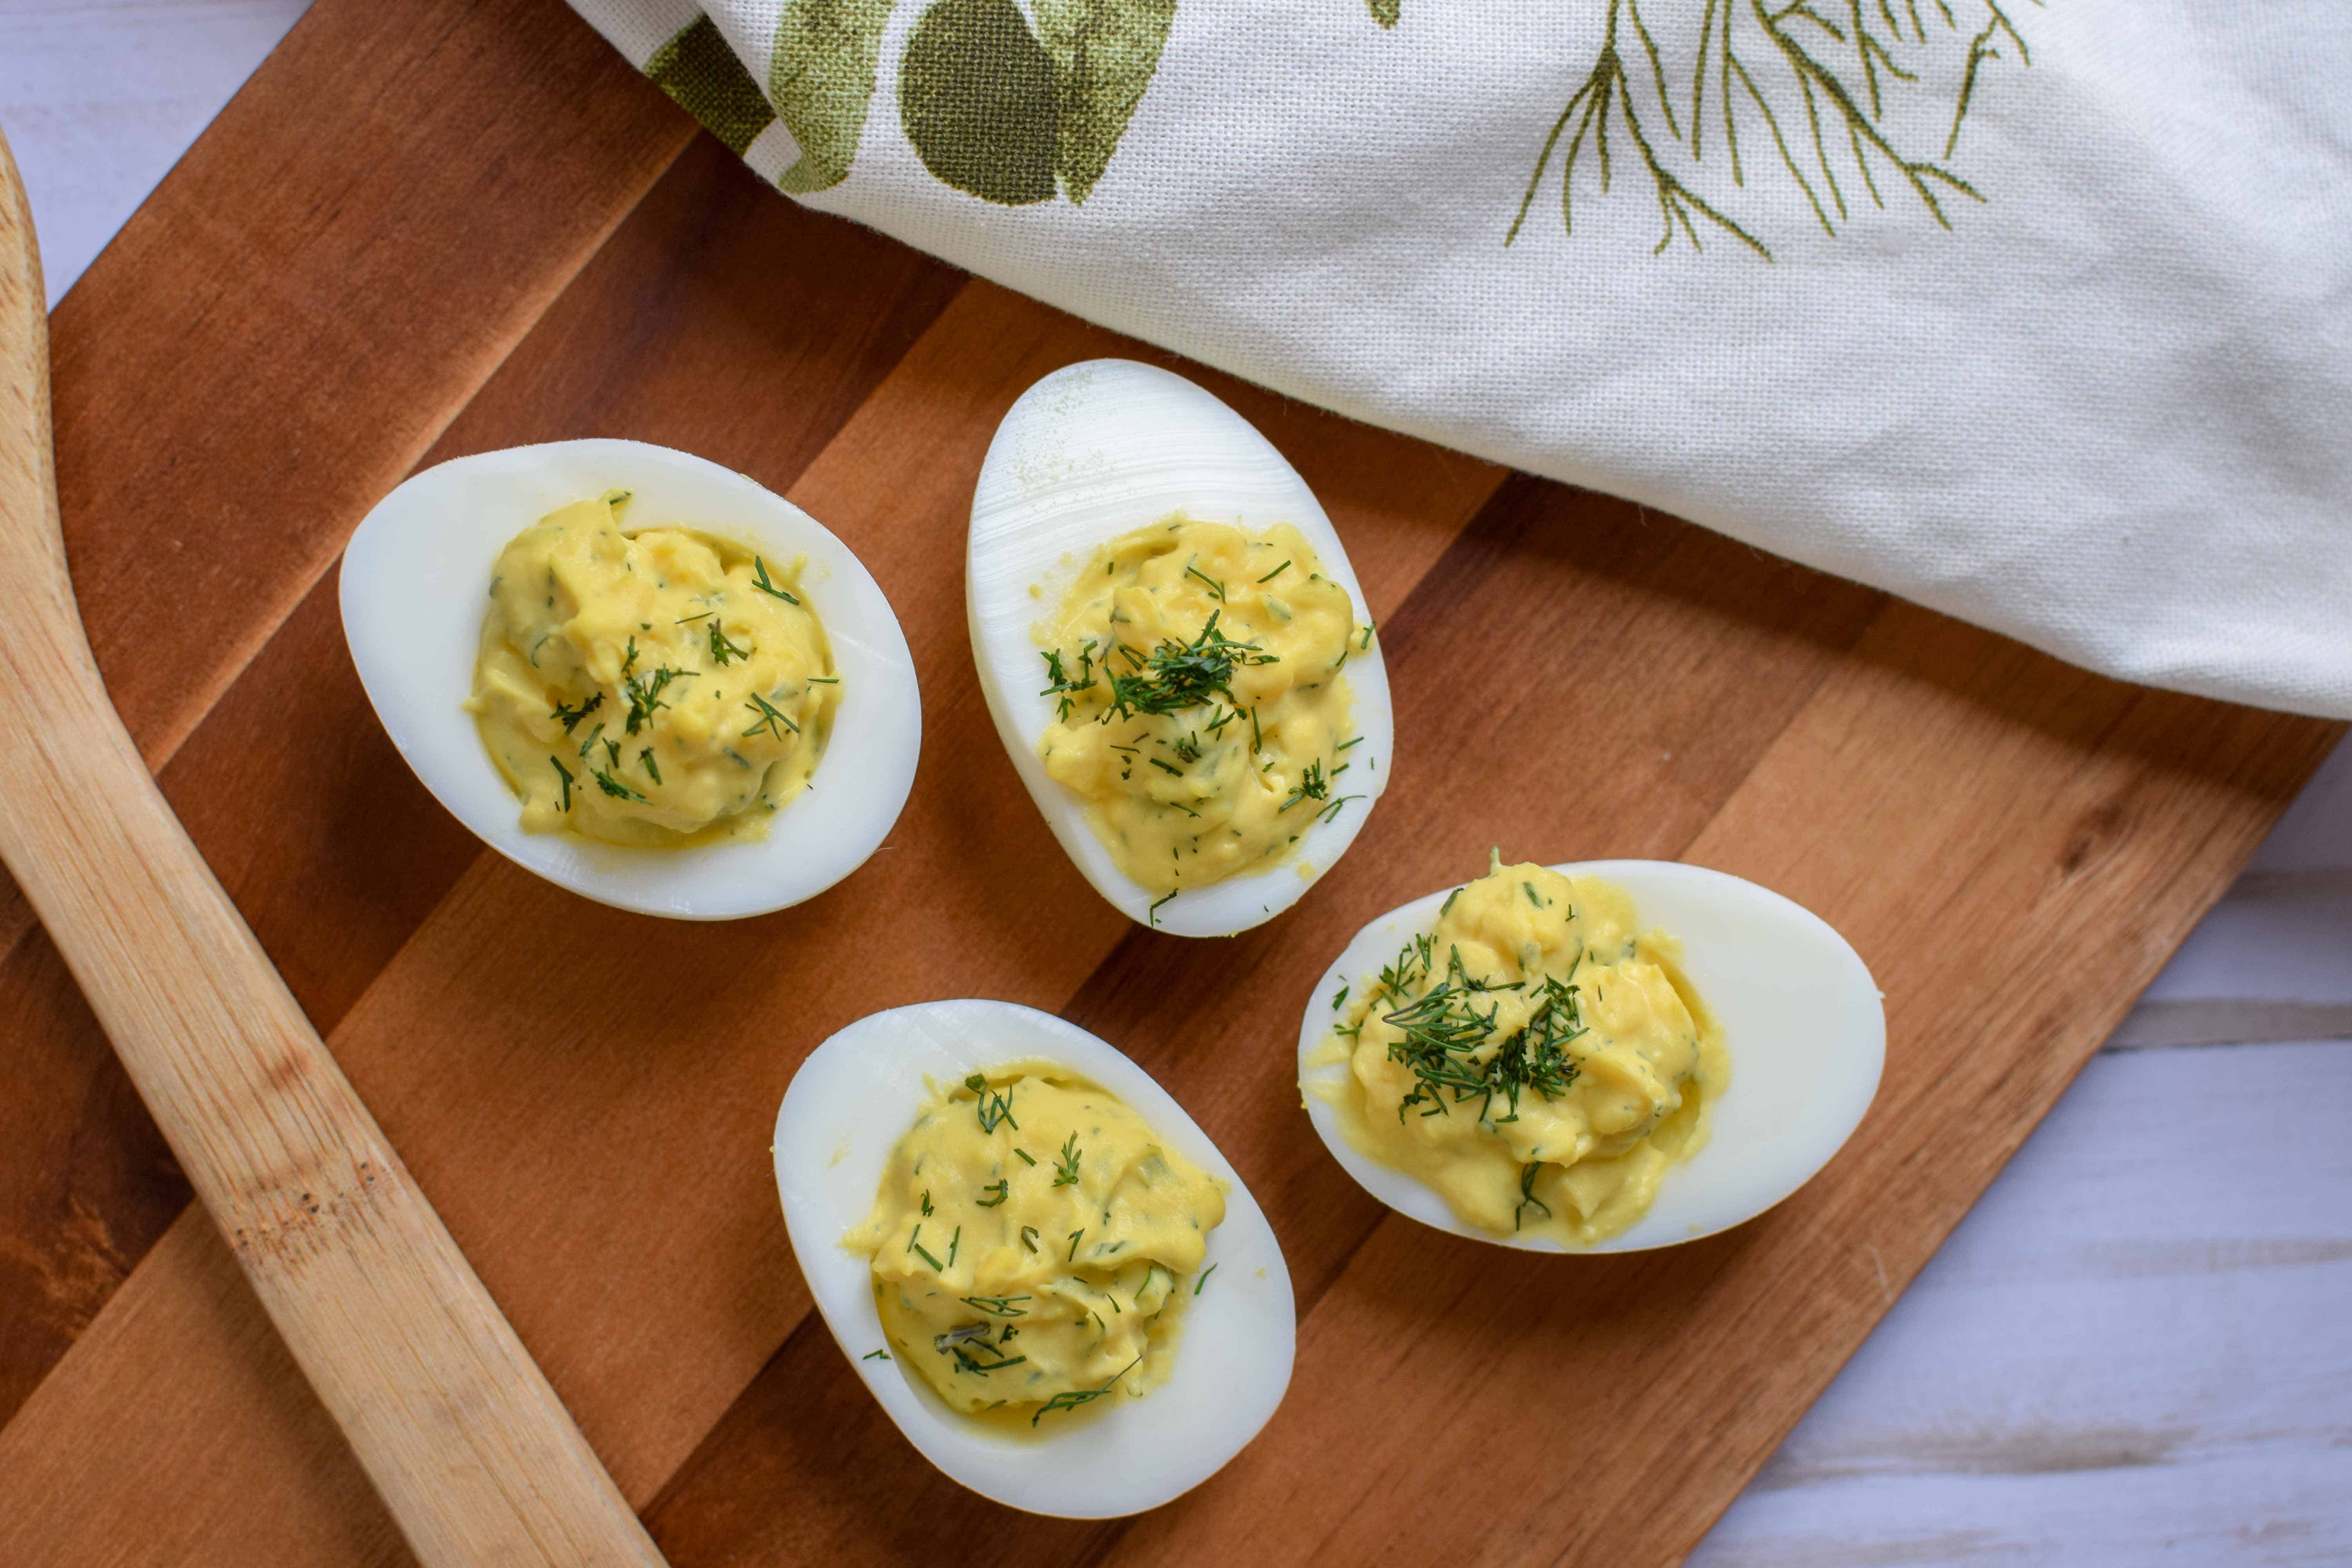 https://www.thebeardandthebaker.com/wp-content/uploads/2019/02/Easy-and-Delicious-Dill-Devilied-Eggs-22.jpg